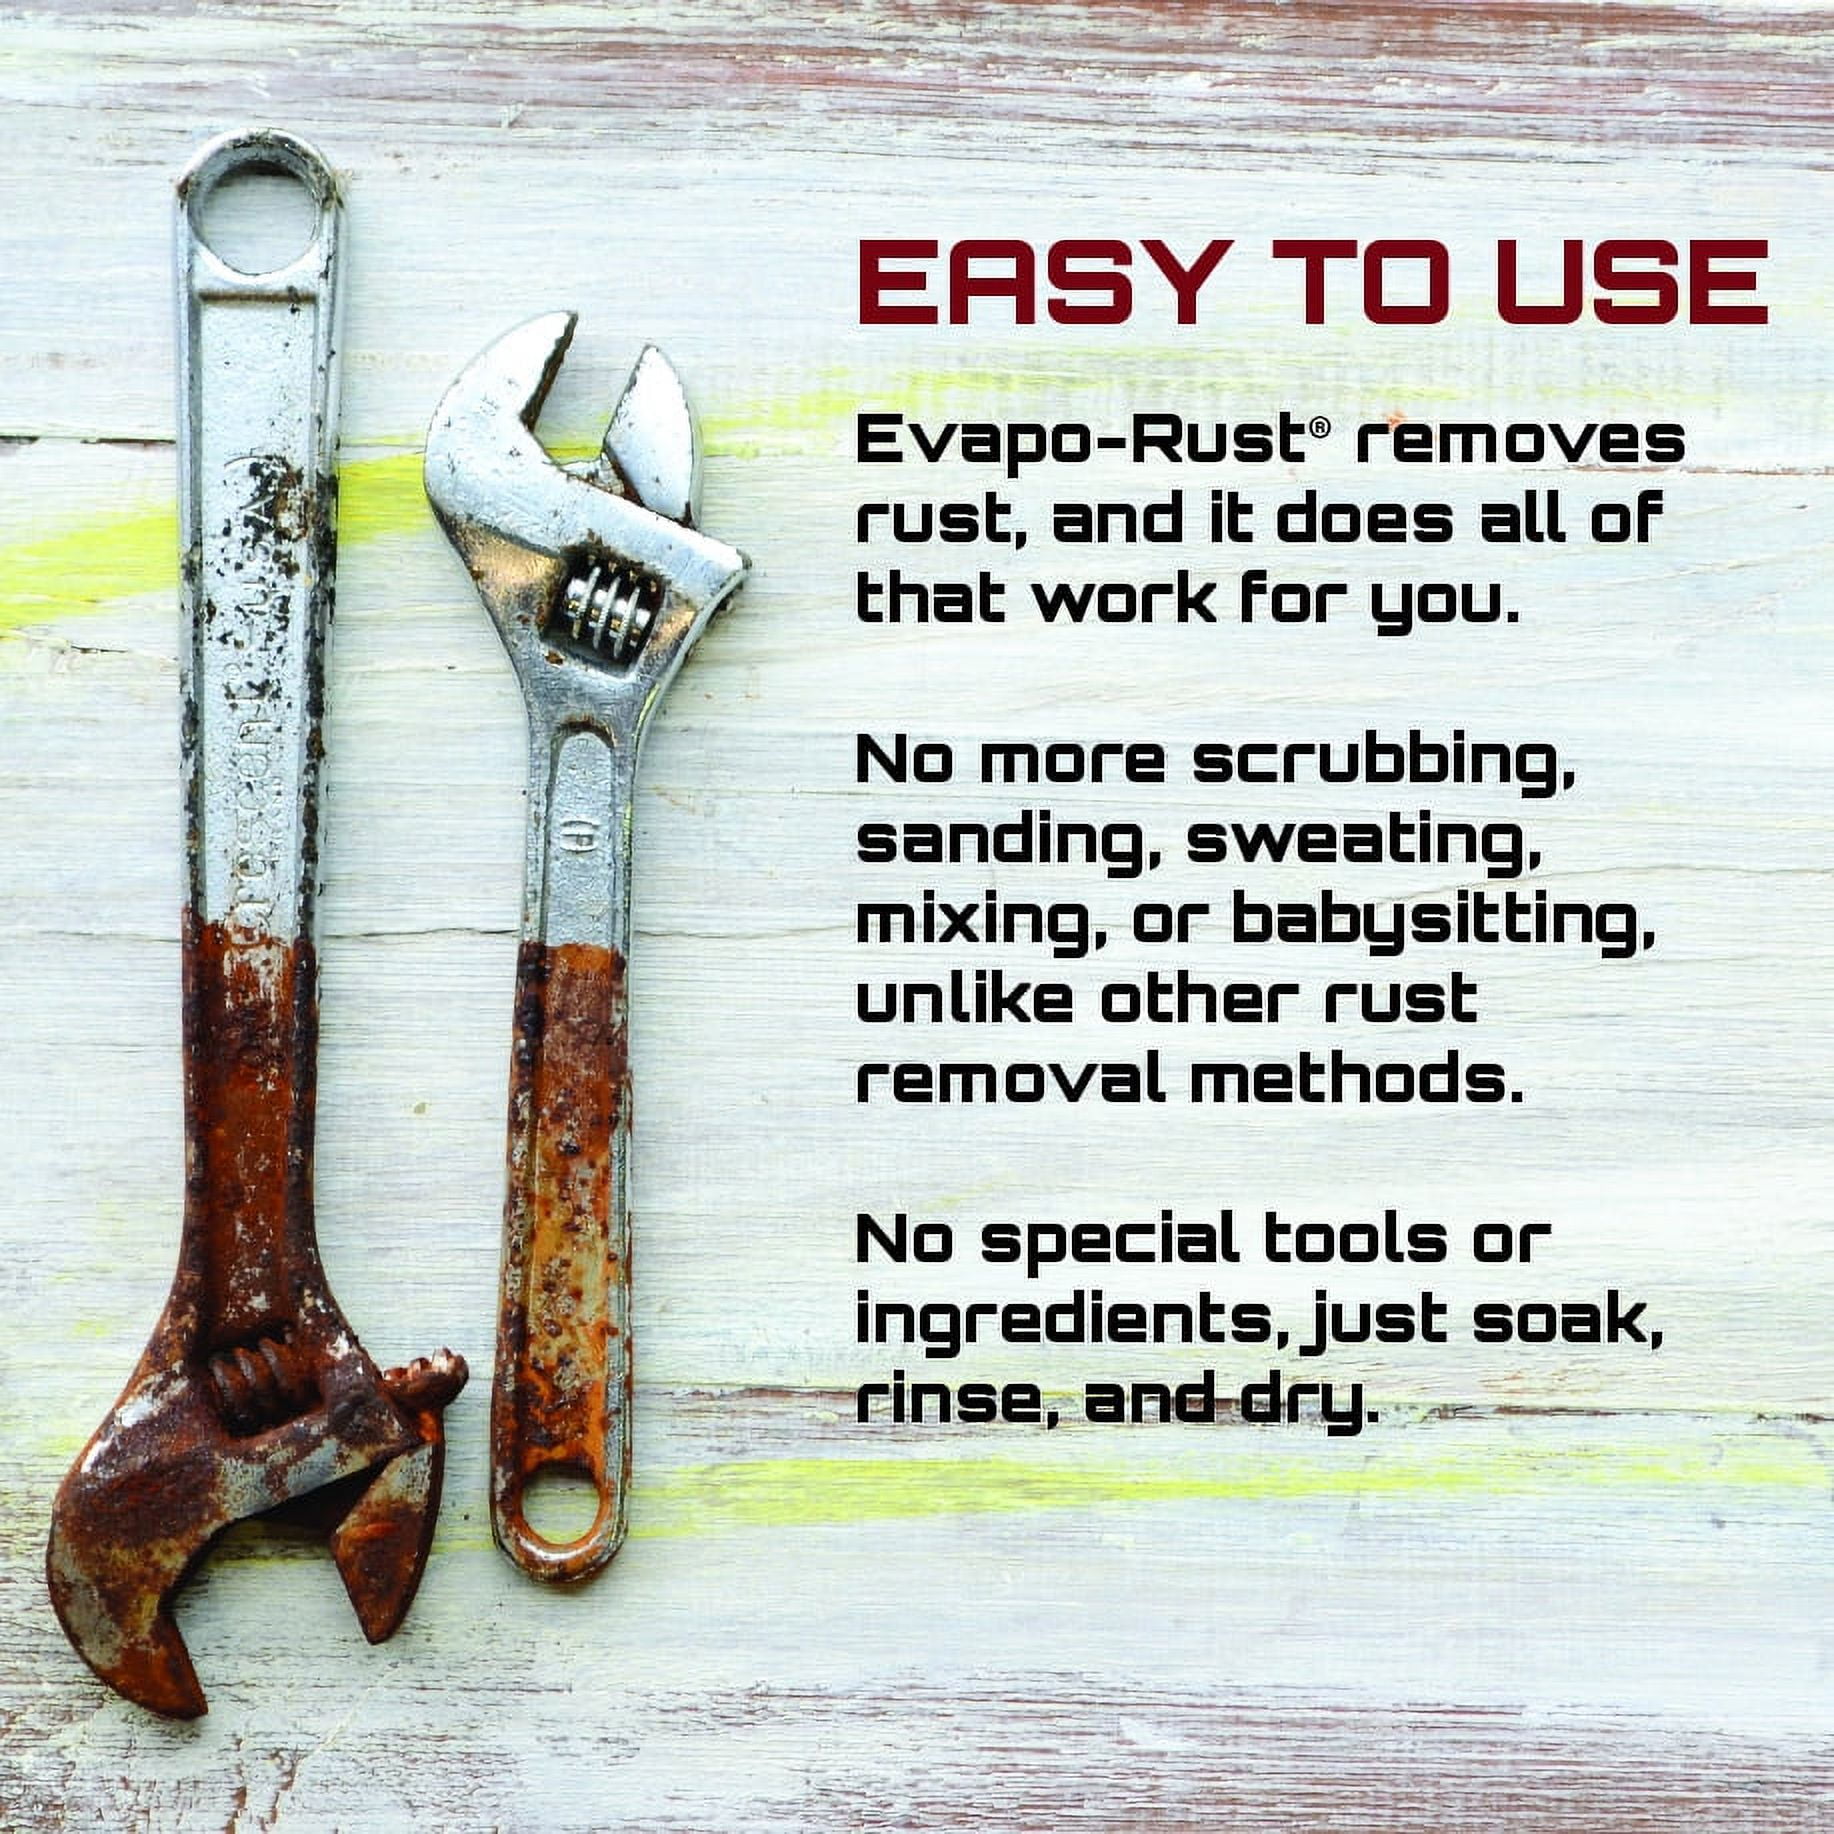 The Best Rust Remover  Quick & Easy with CRC's Evapo-Rust®